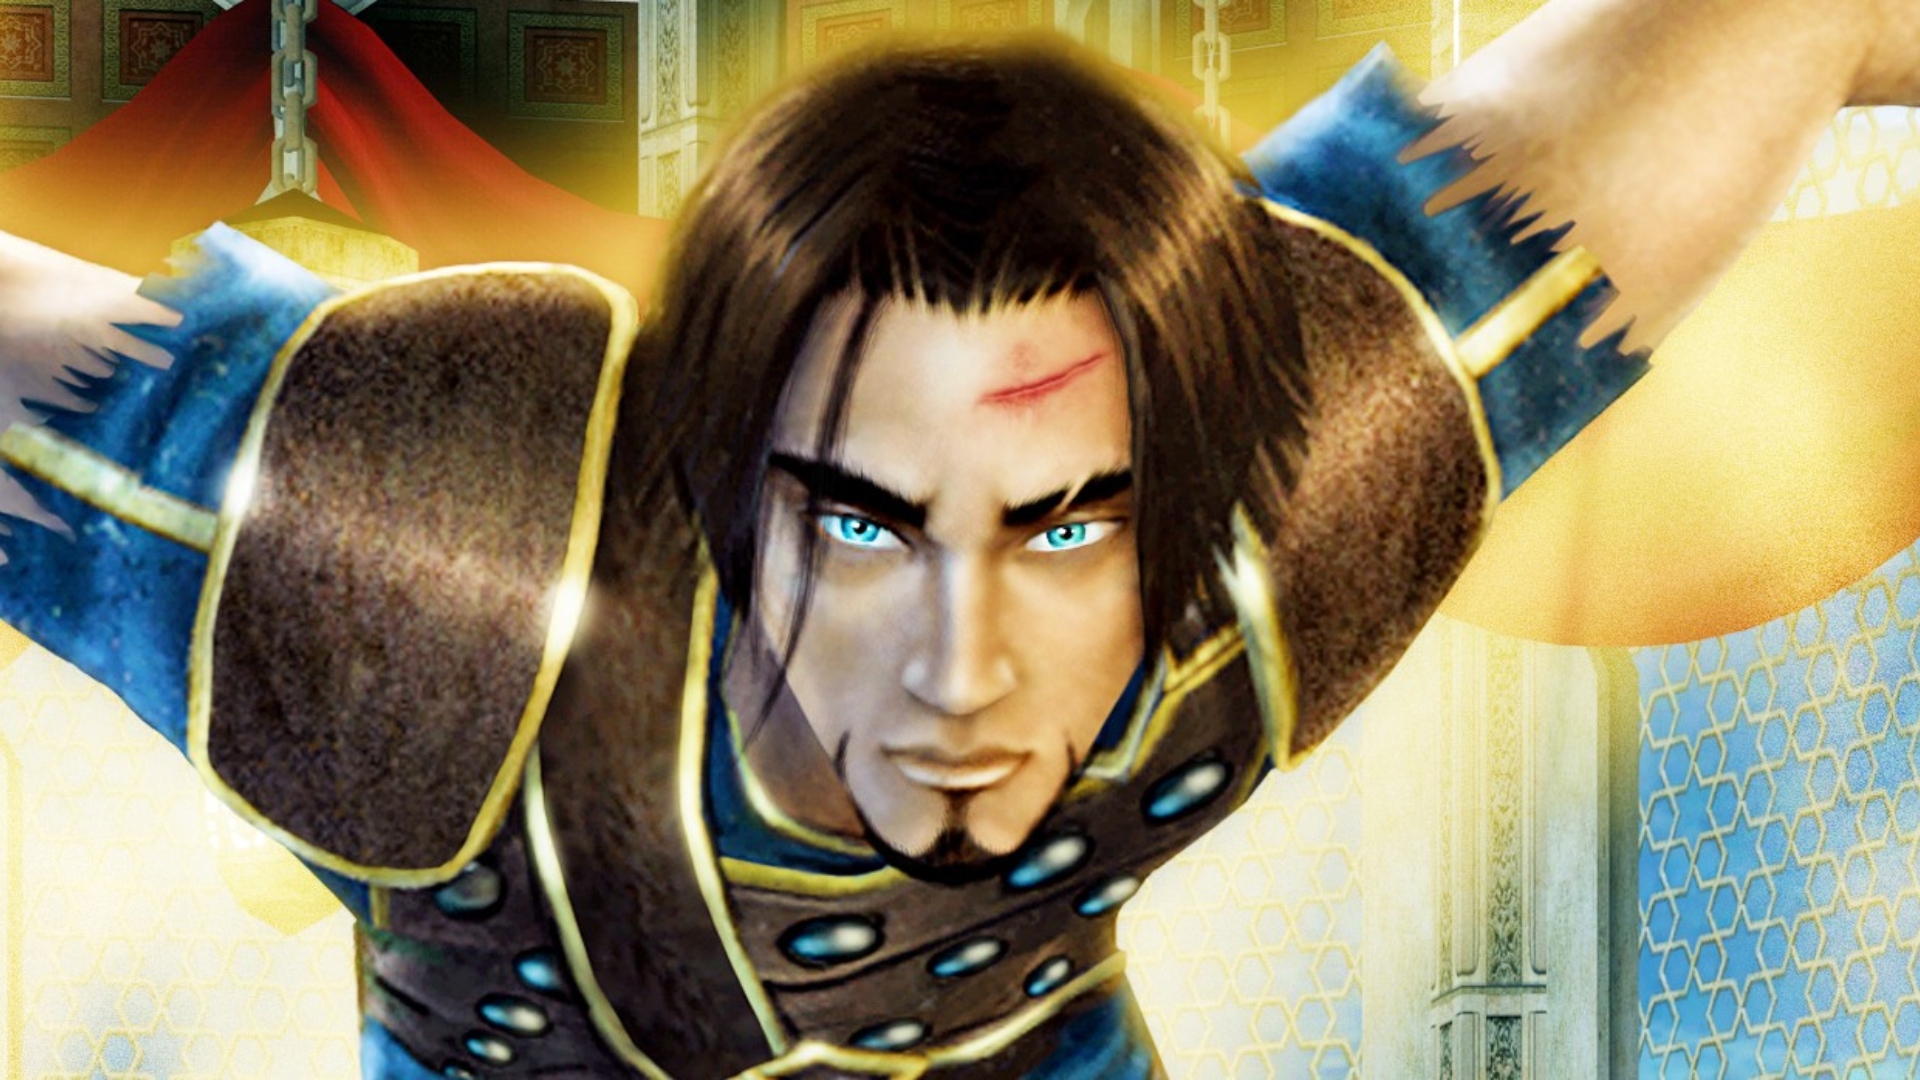 Everything we know about the Prince of Persia: The Sands of Time Remake